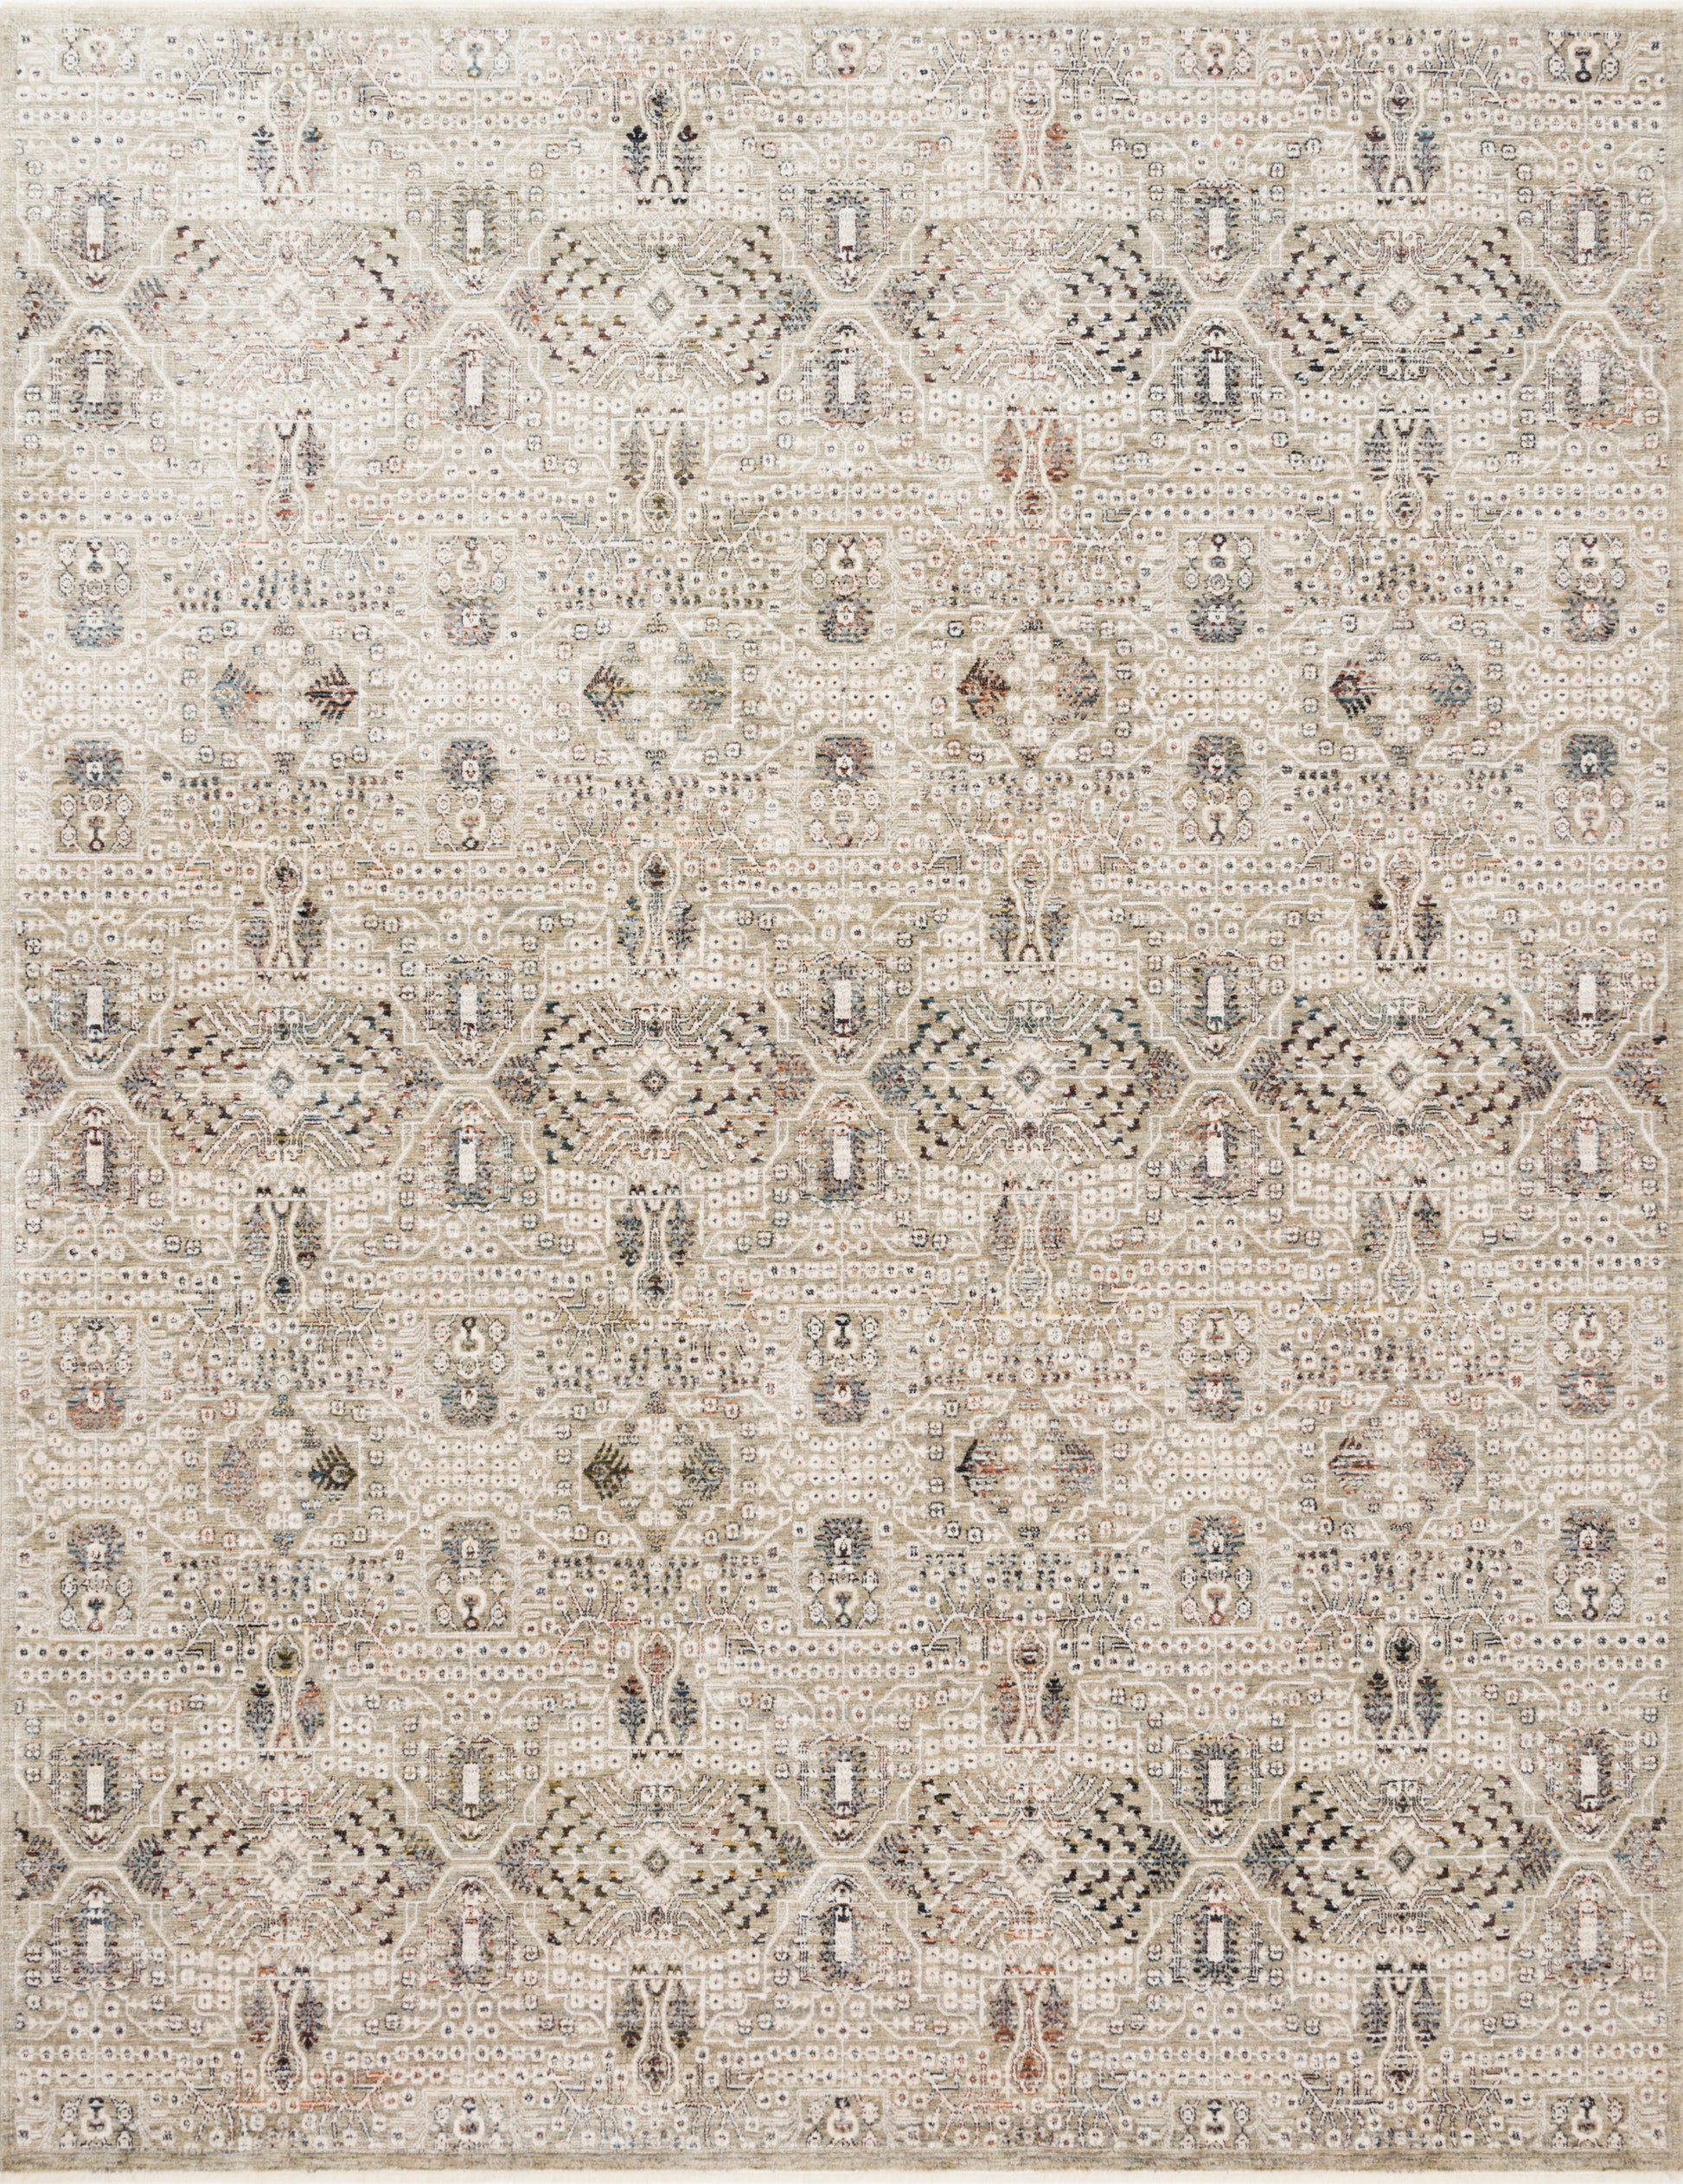 A picture of Loloi's Theia rug, in style THE-06, color Granite / Ivory